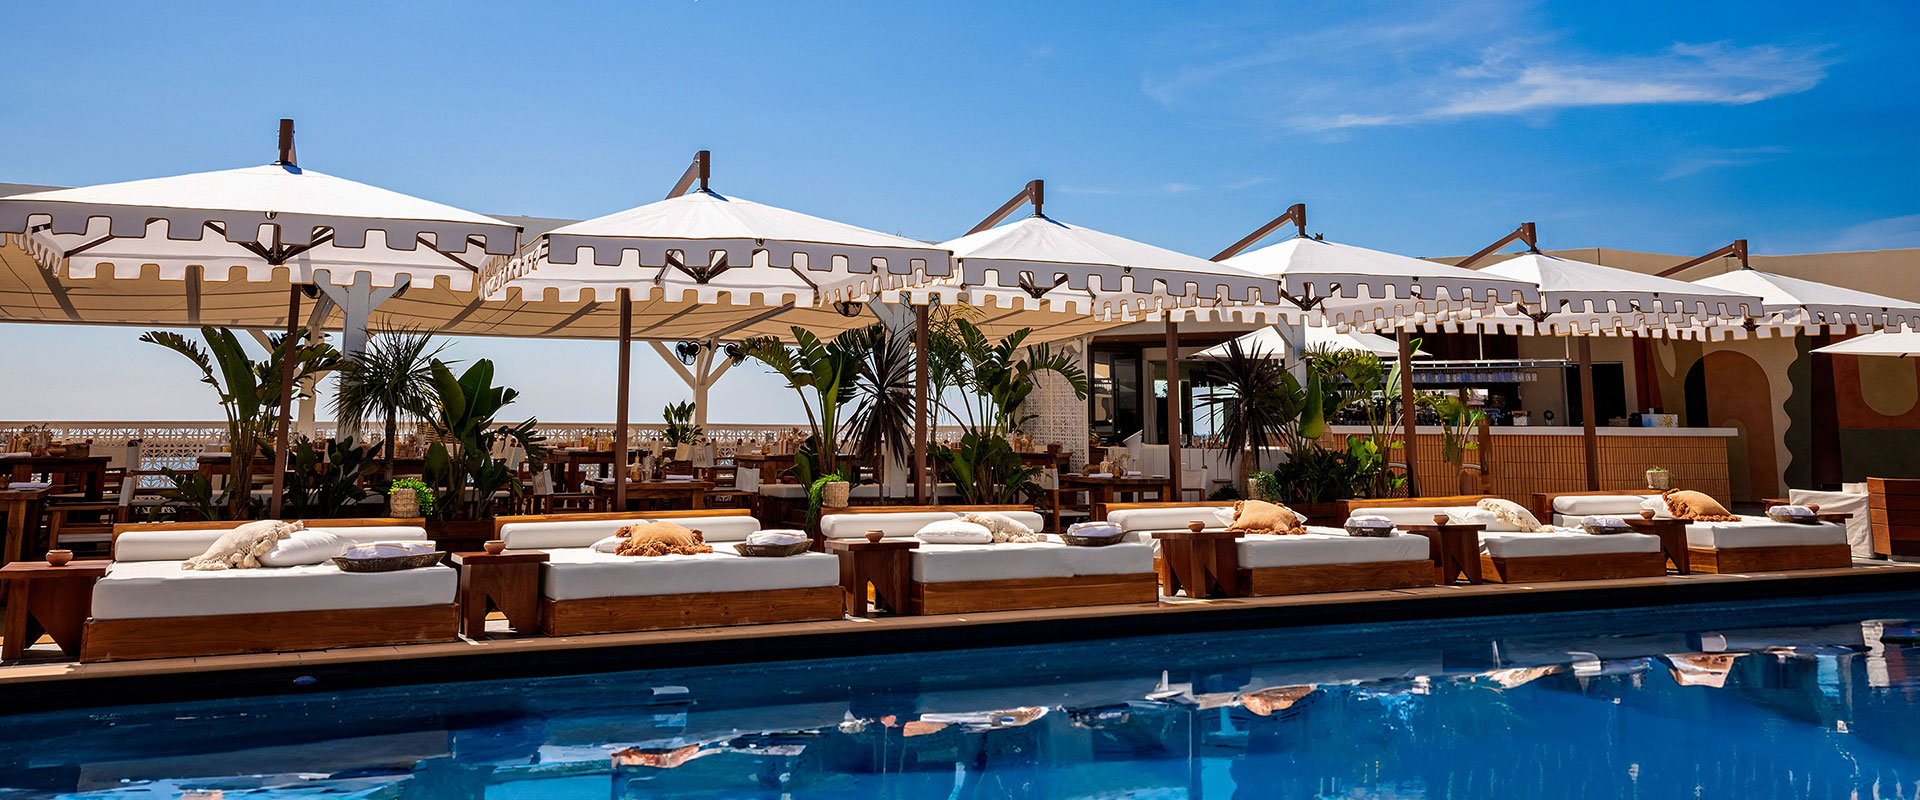 Fairmont Monaco resort pool lined by covered cabanas